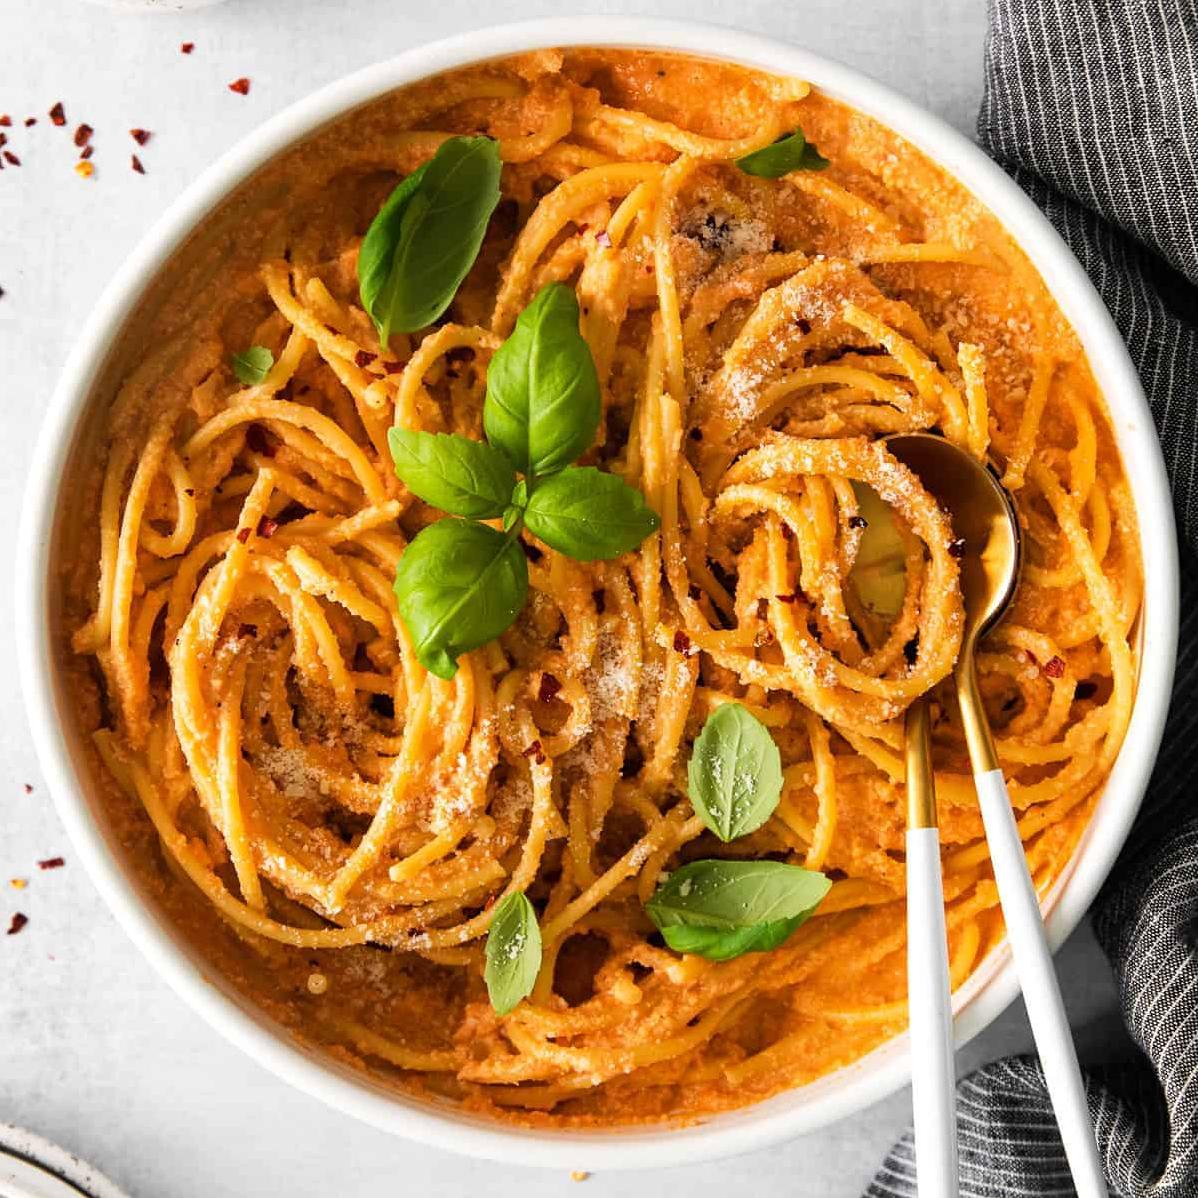  This creamy tomato sauce will make your taste buds sing with joy!